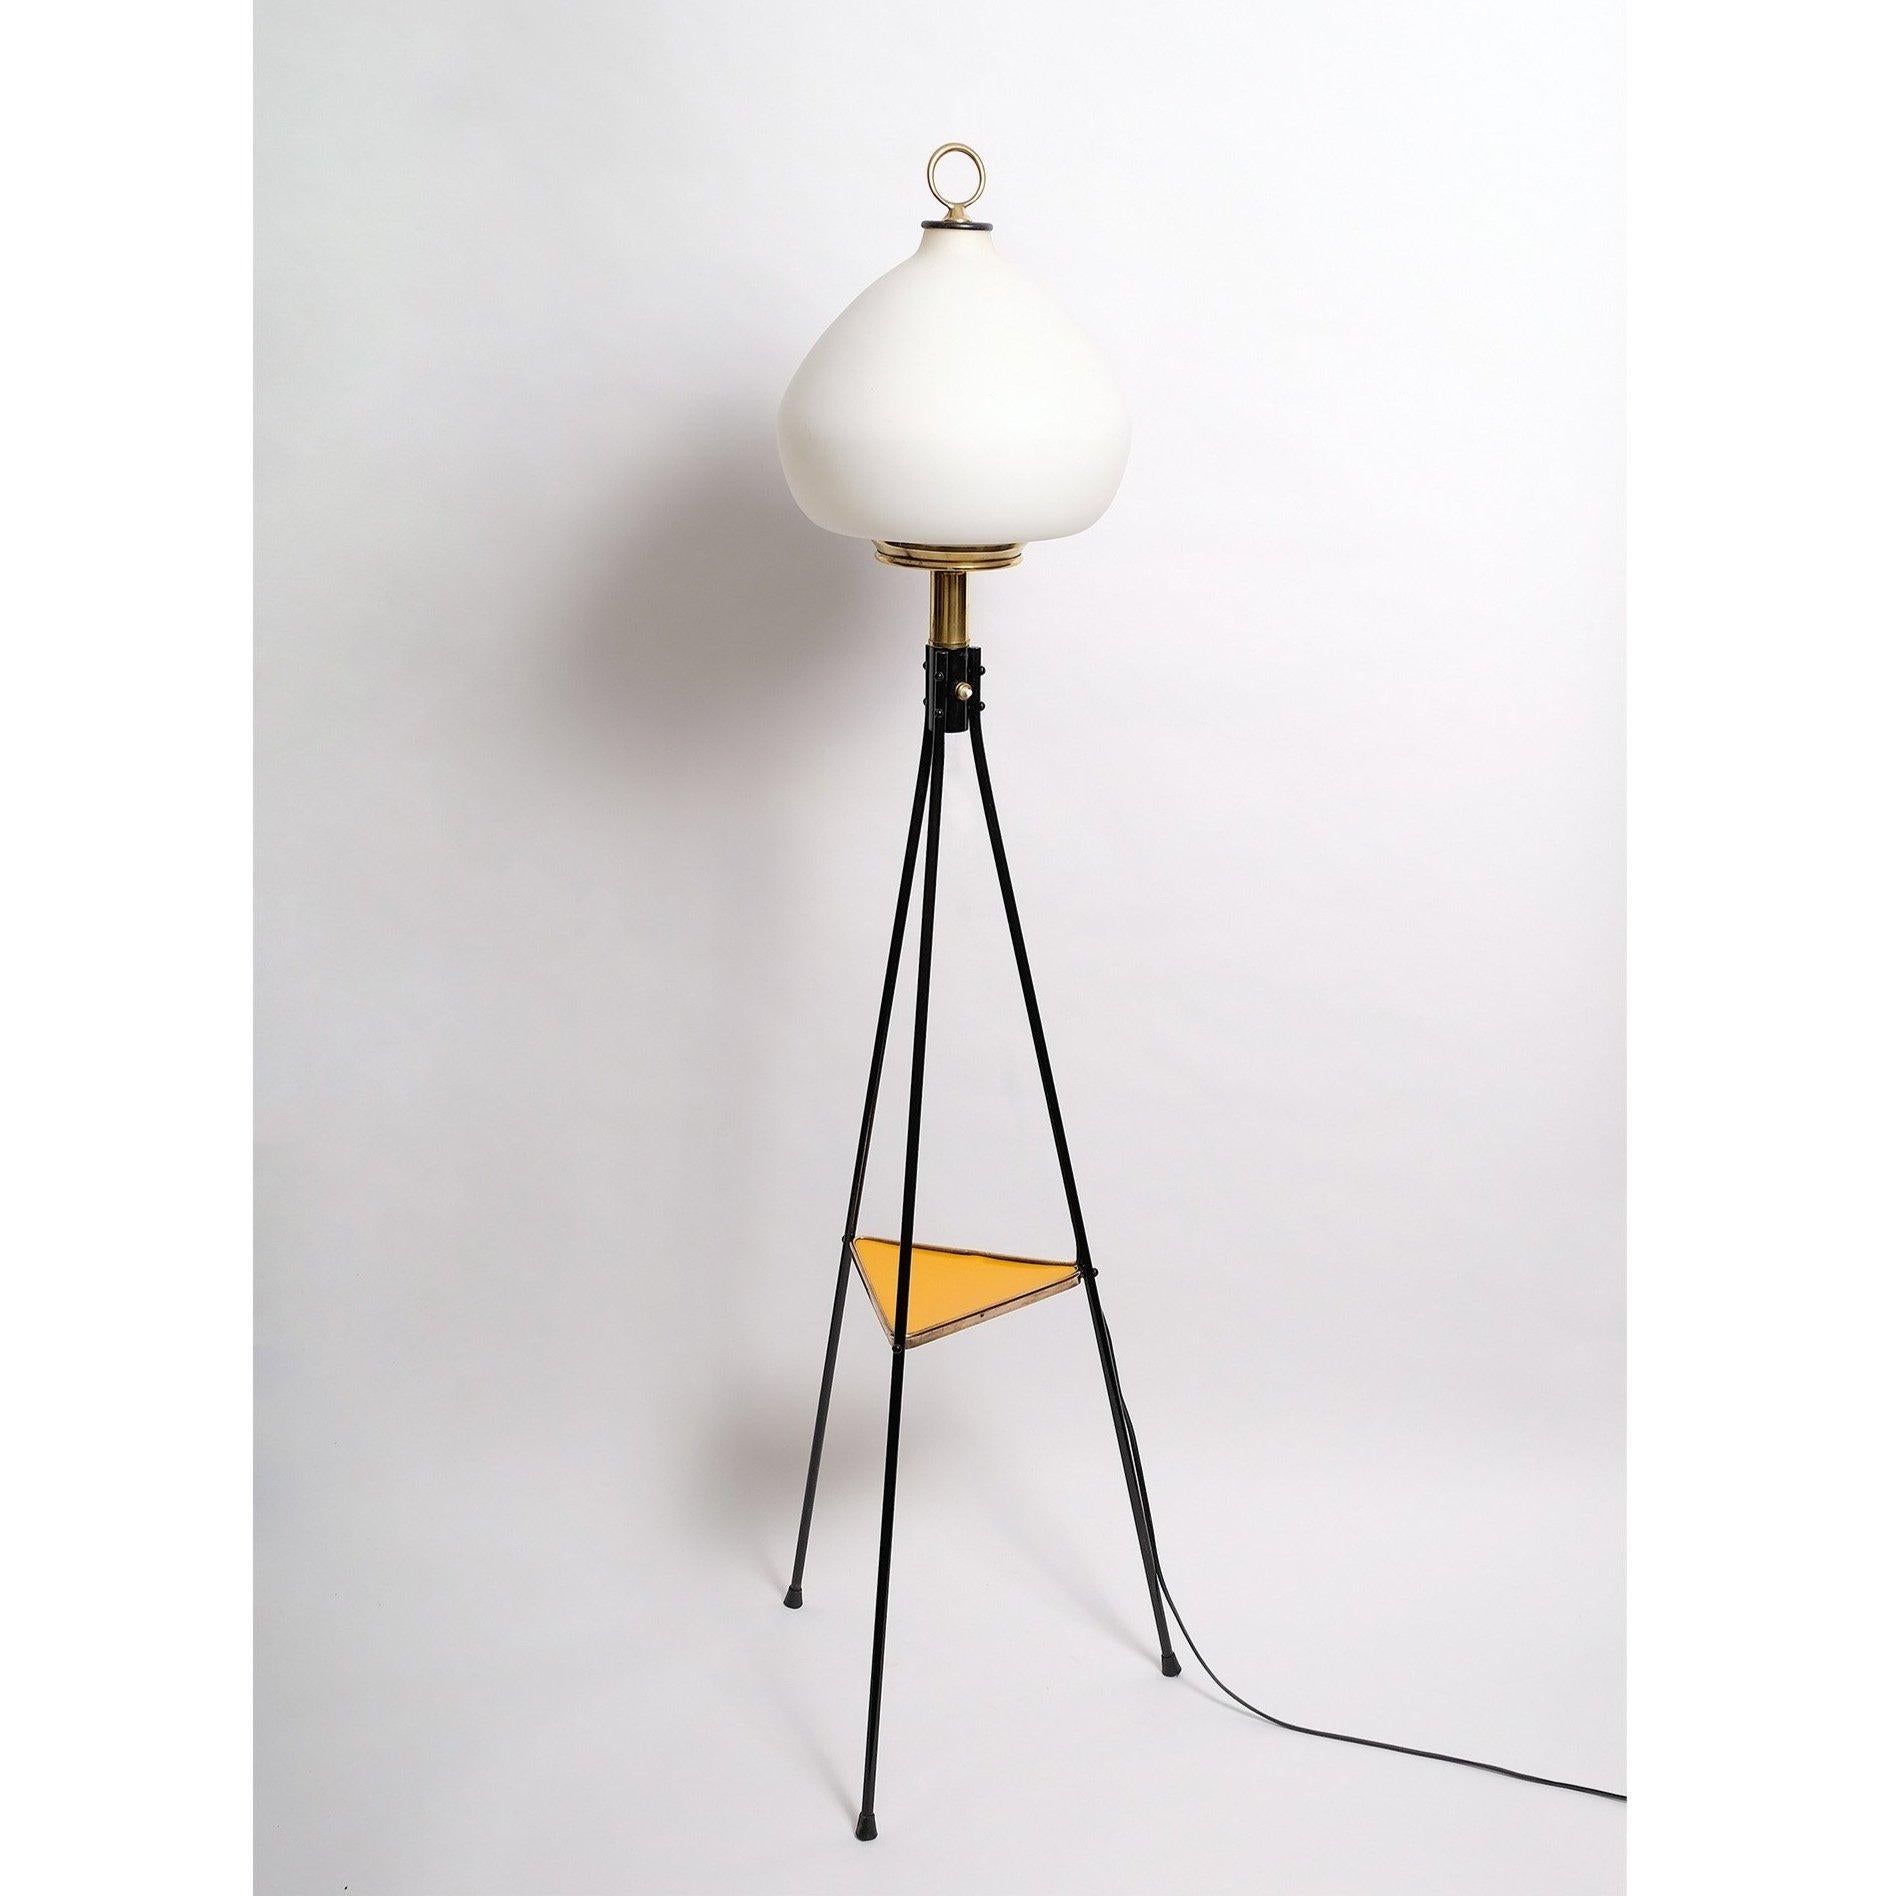 Stilnovo tripod floor lamp, Italy, 1950s.  Lacquered steel legs, brass framed yellow laminate mid-level shelf, brass body and cased opaline glass shade in mint condition.  40 to 60 watt E-26 Edison medium base incandescent bulb or higher if LED/CFL.